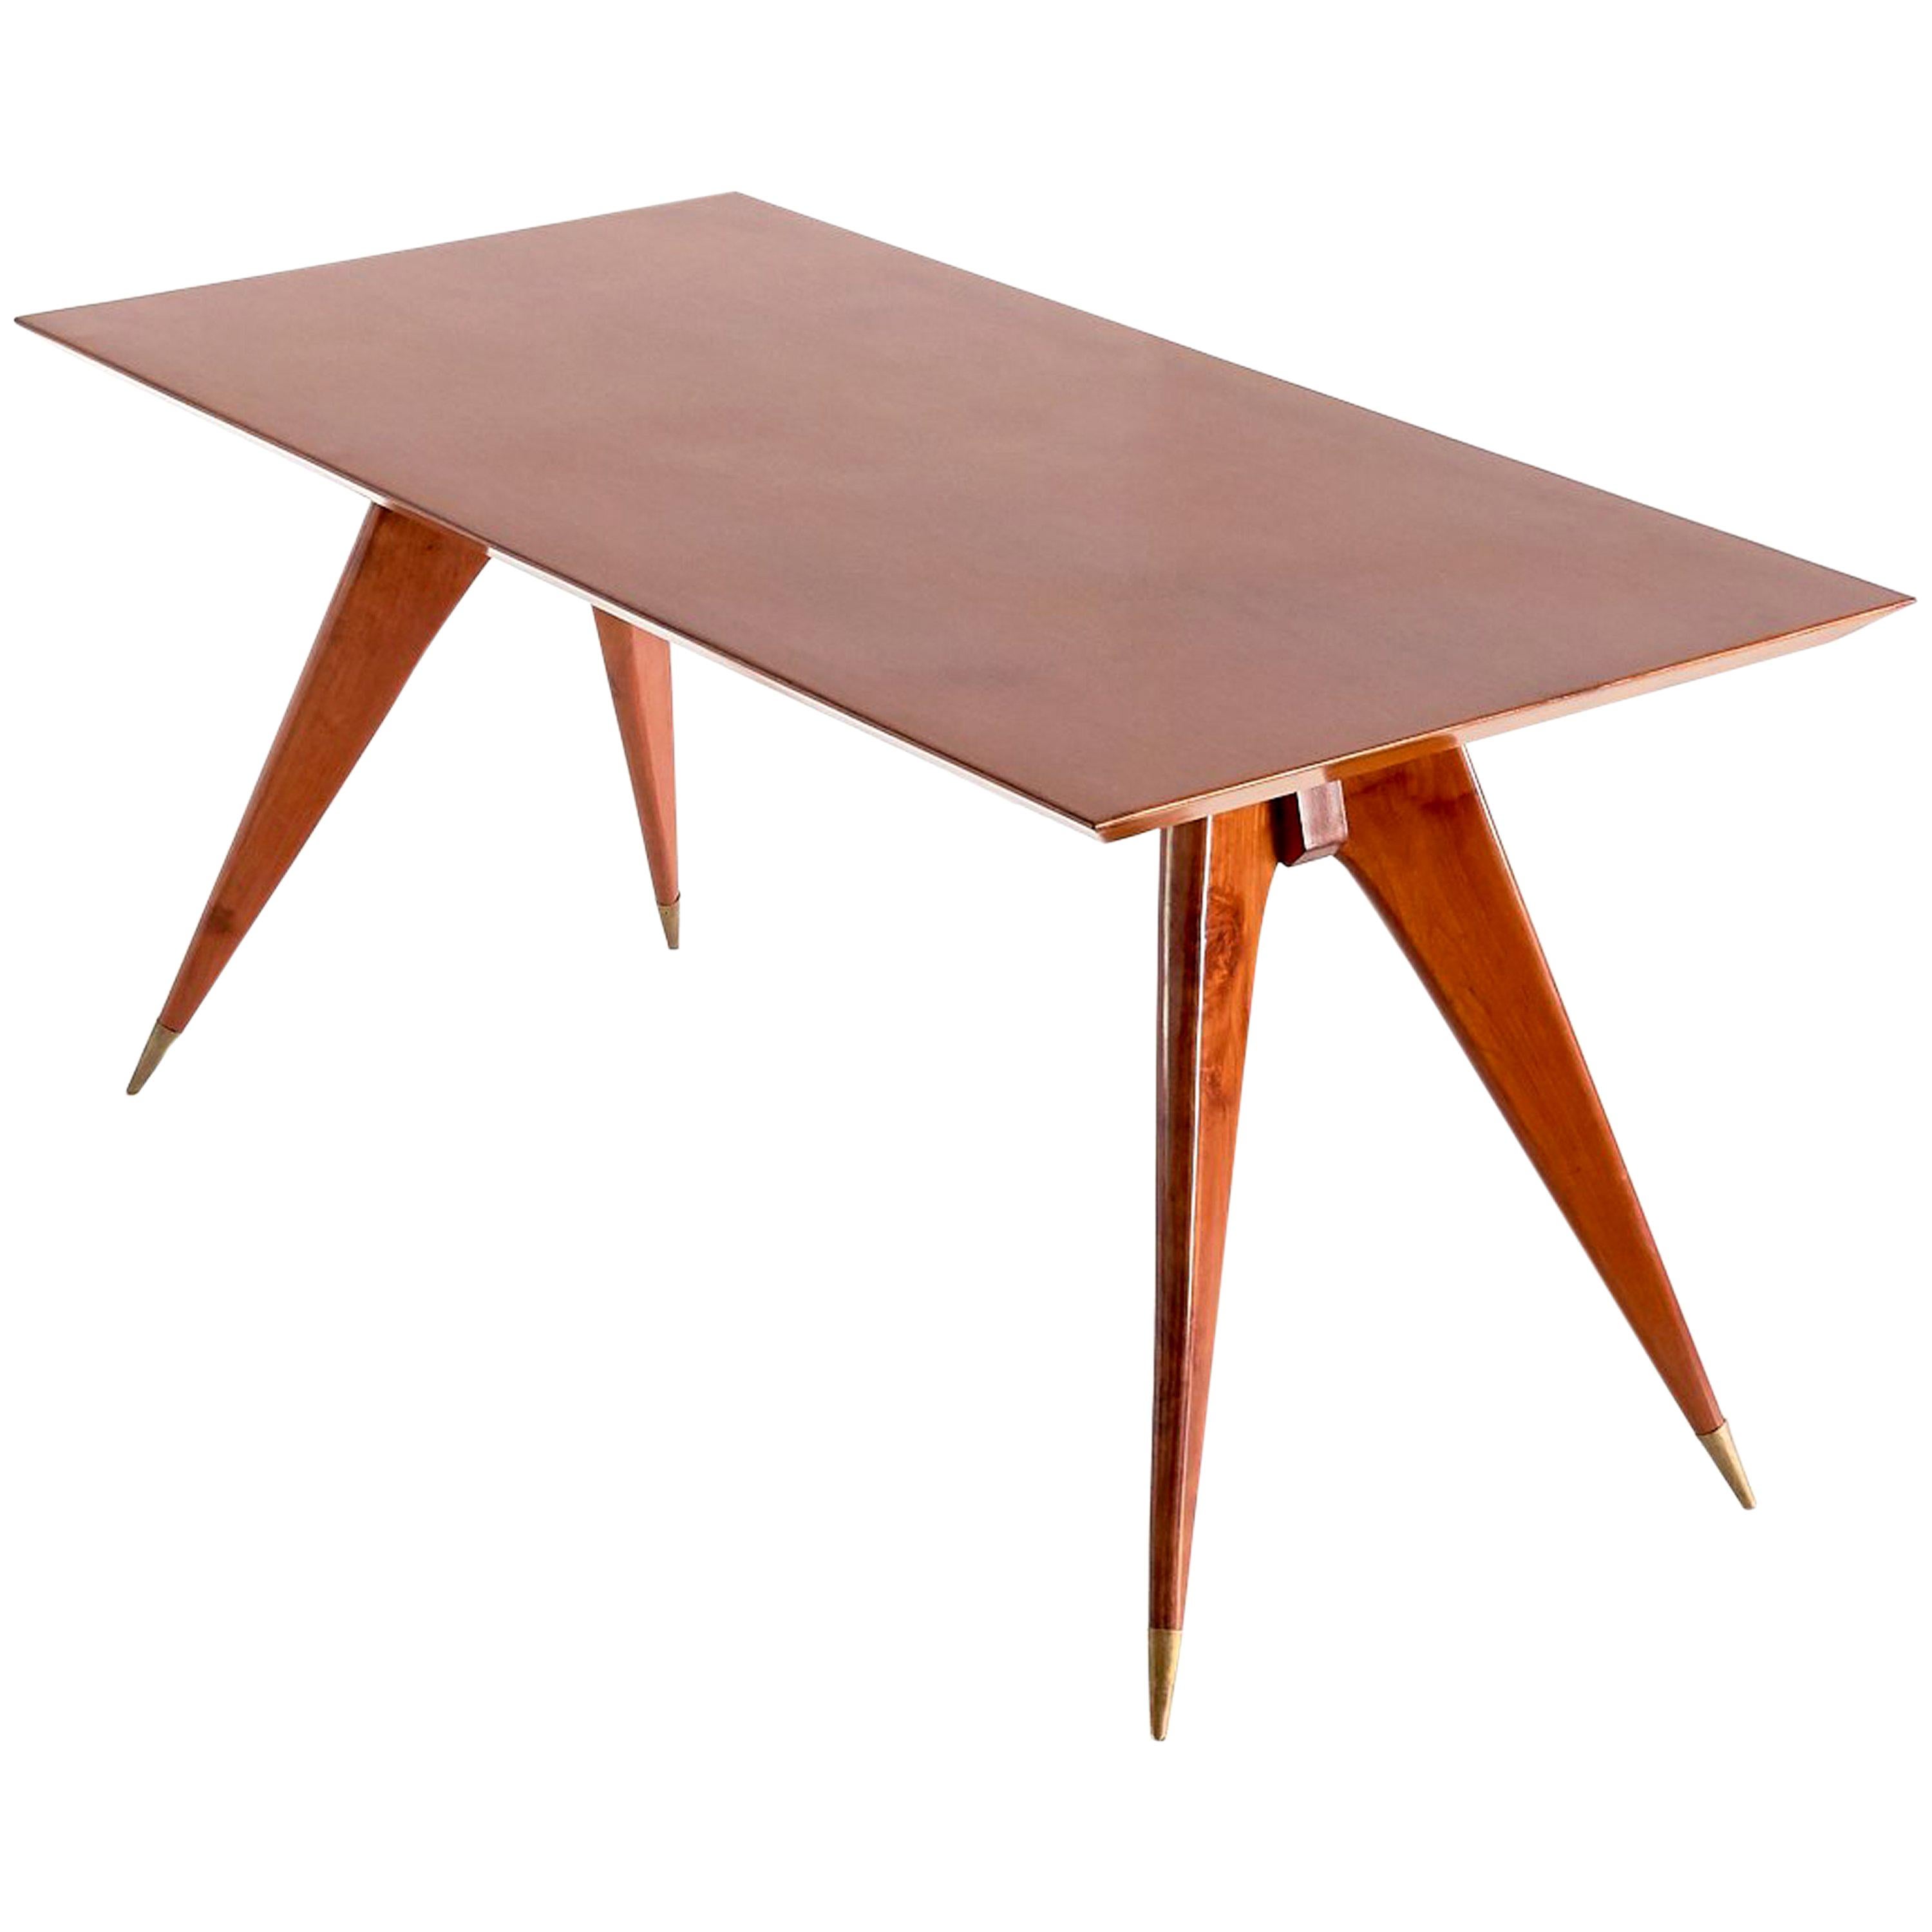 Melchiorre Bega Dining Table in Walnut and Brass, Italy, Early 1950s